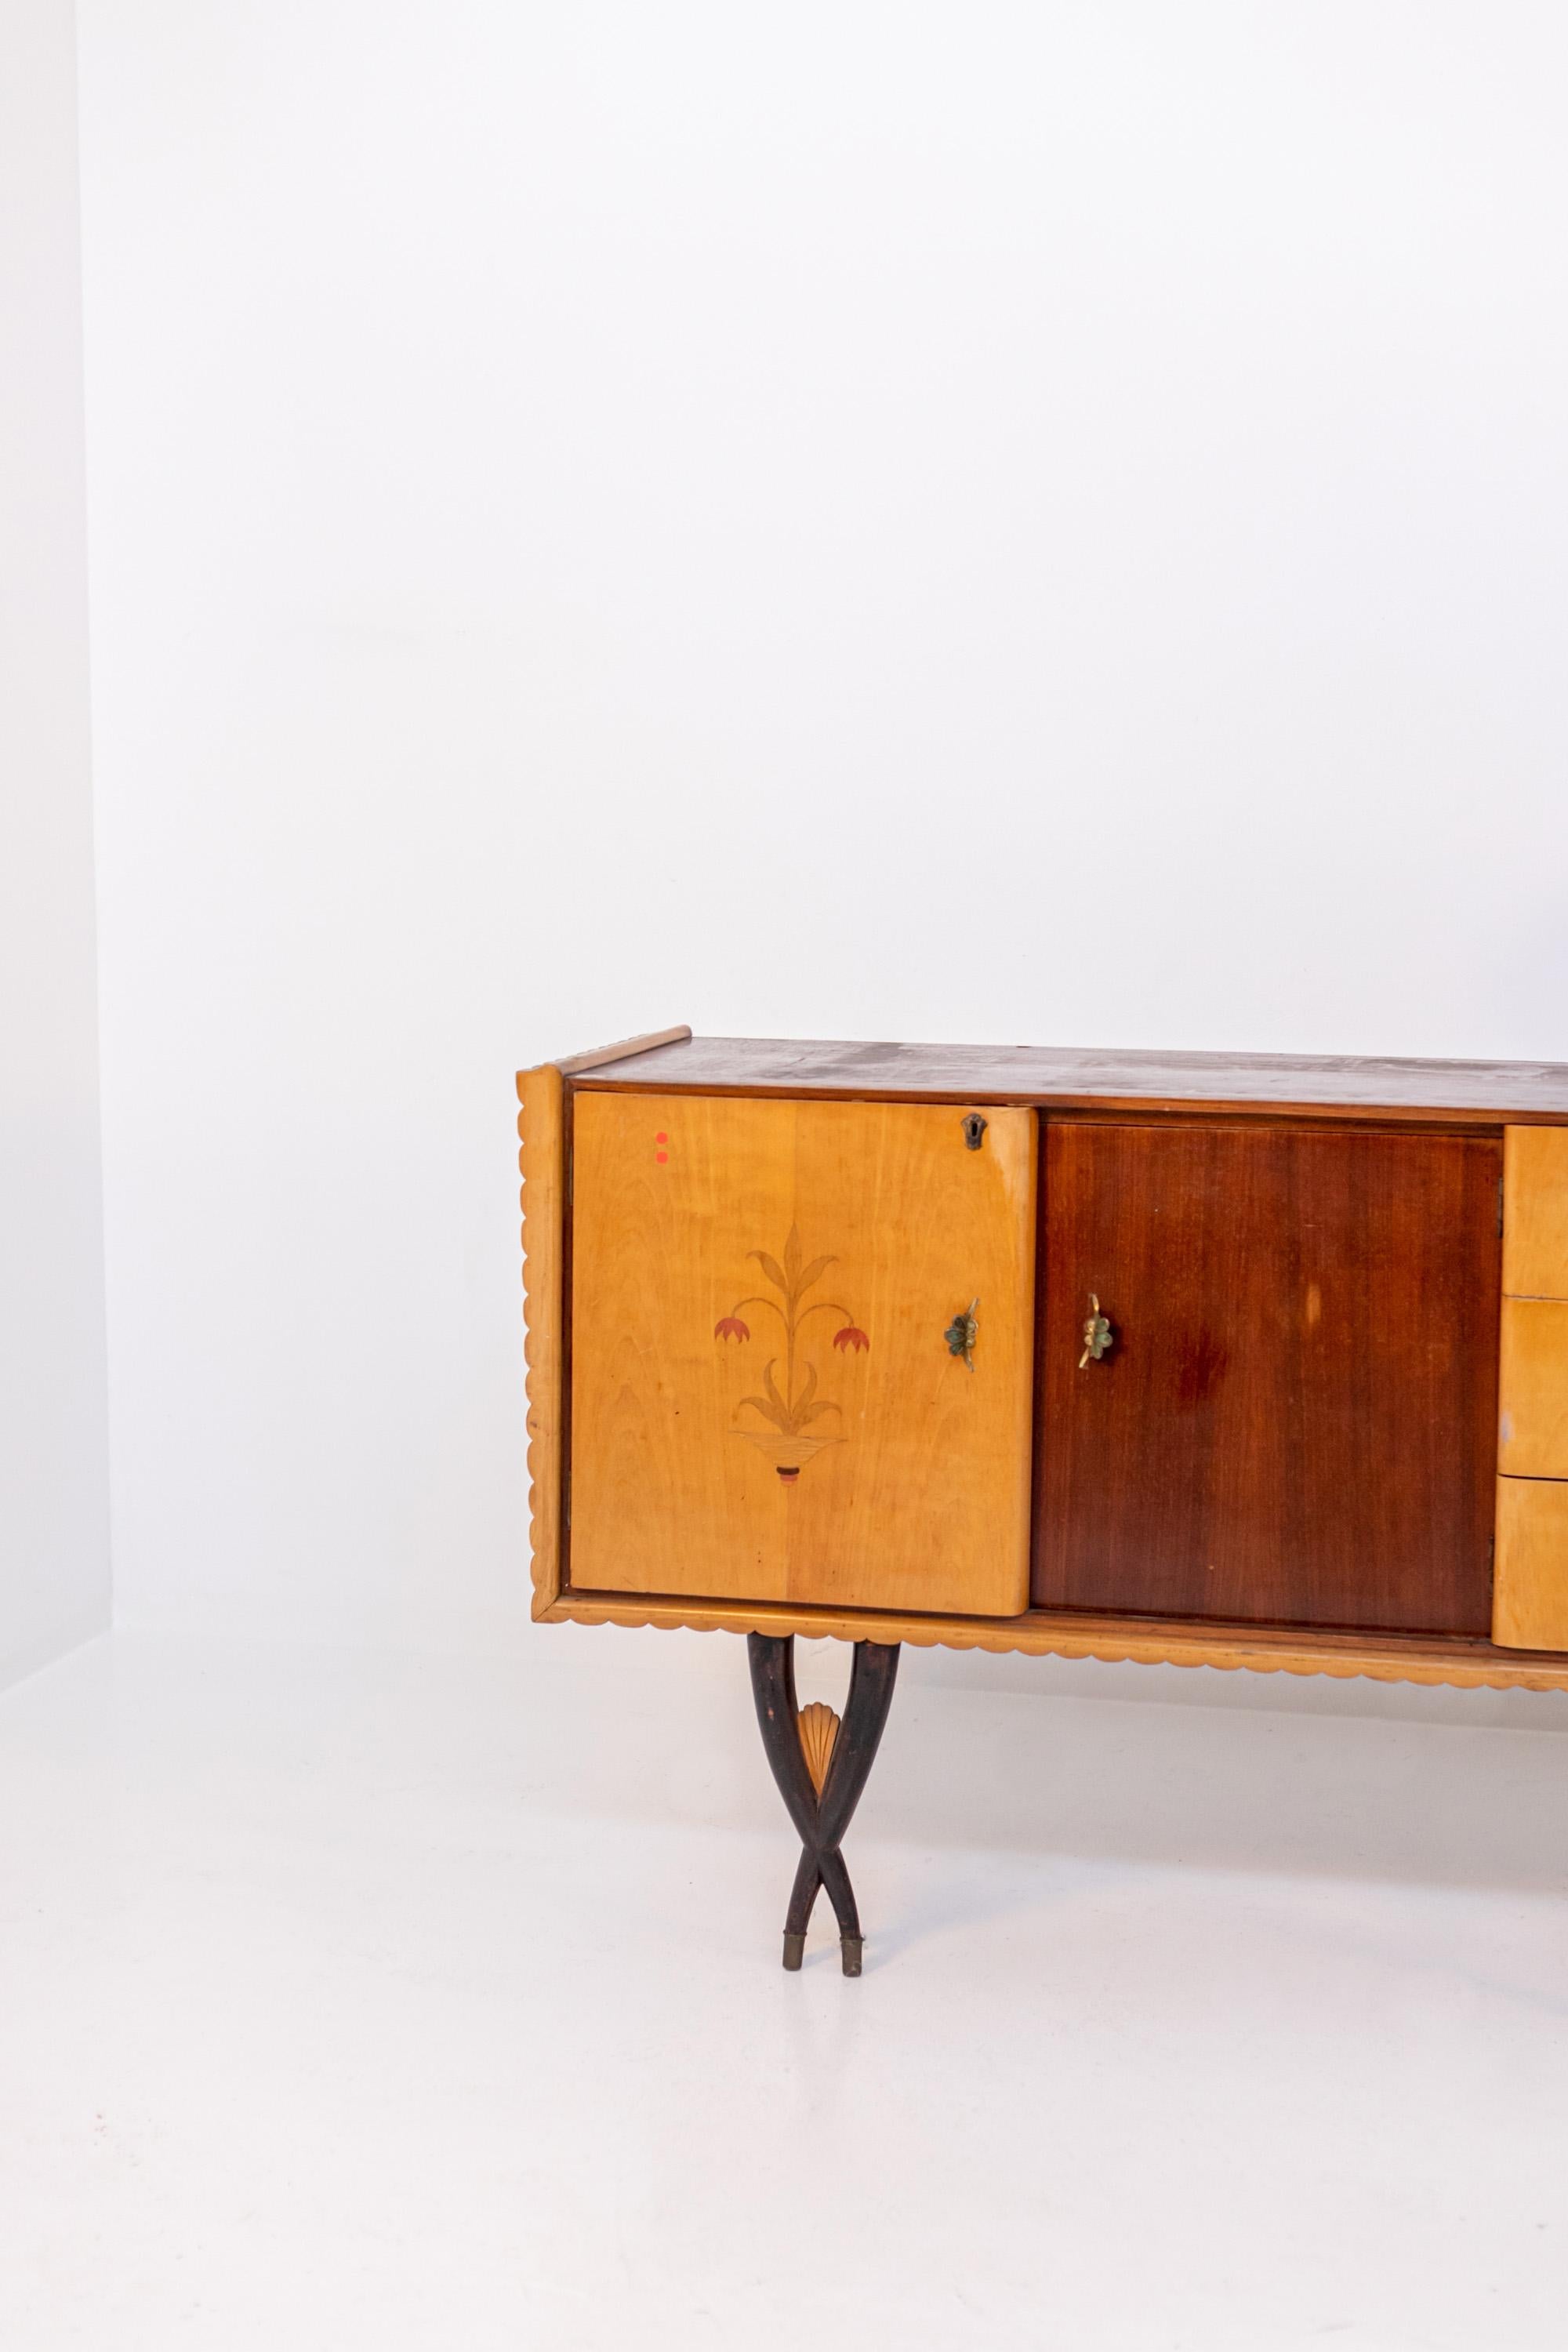 Large Italian sideboard attributed to 1950s designer Paolo buffa. The sideboard is made of various types of wood. The sideboard with four doors and three drawers in the center. The two side doors are in light wood and the central ones in darker